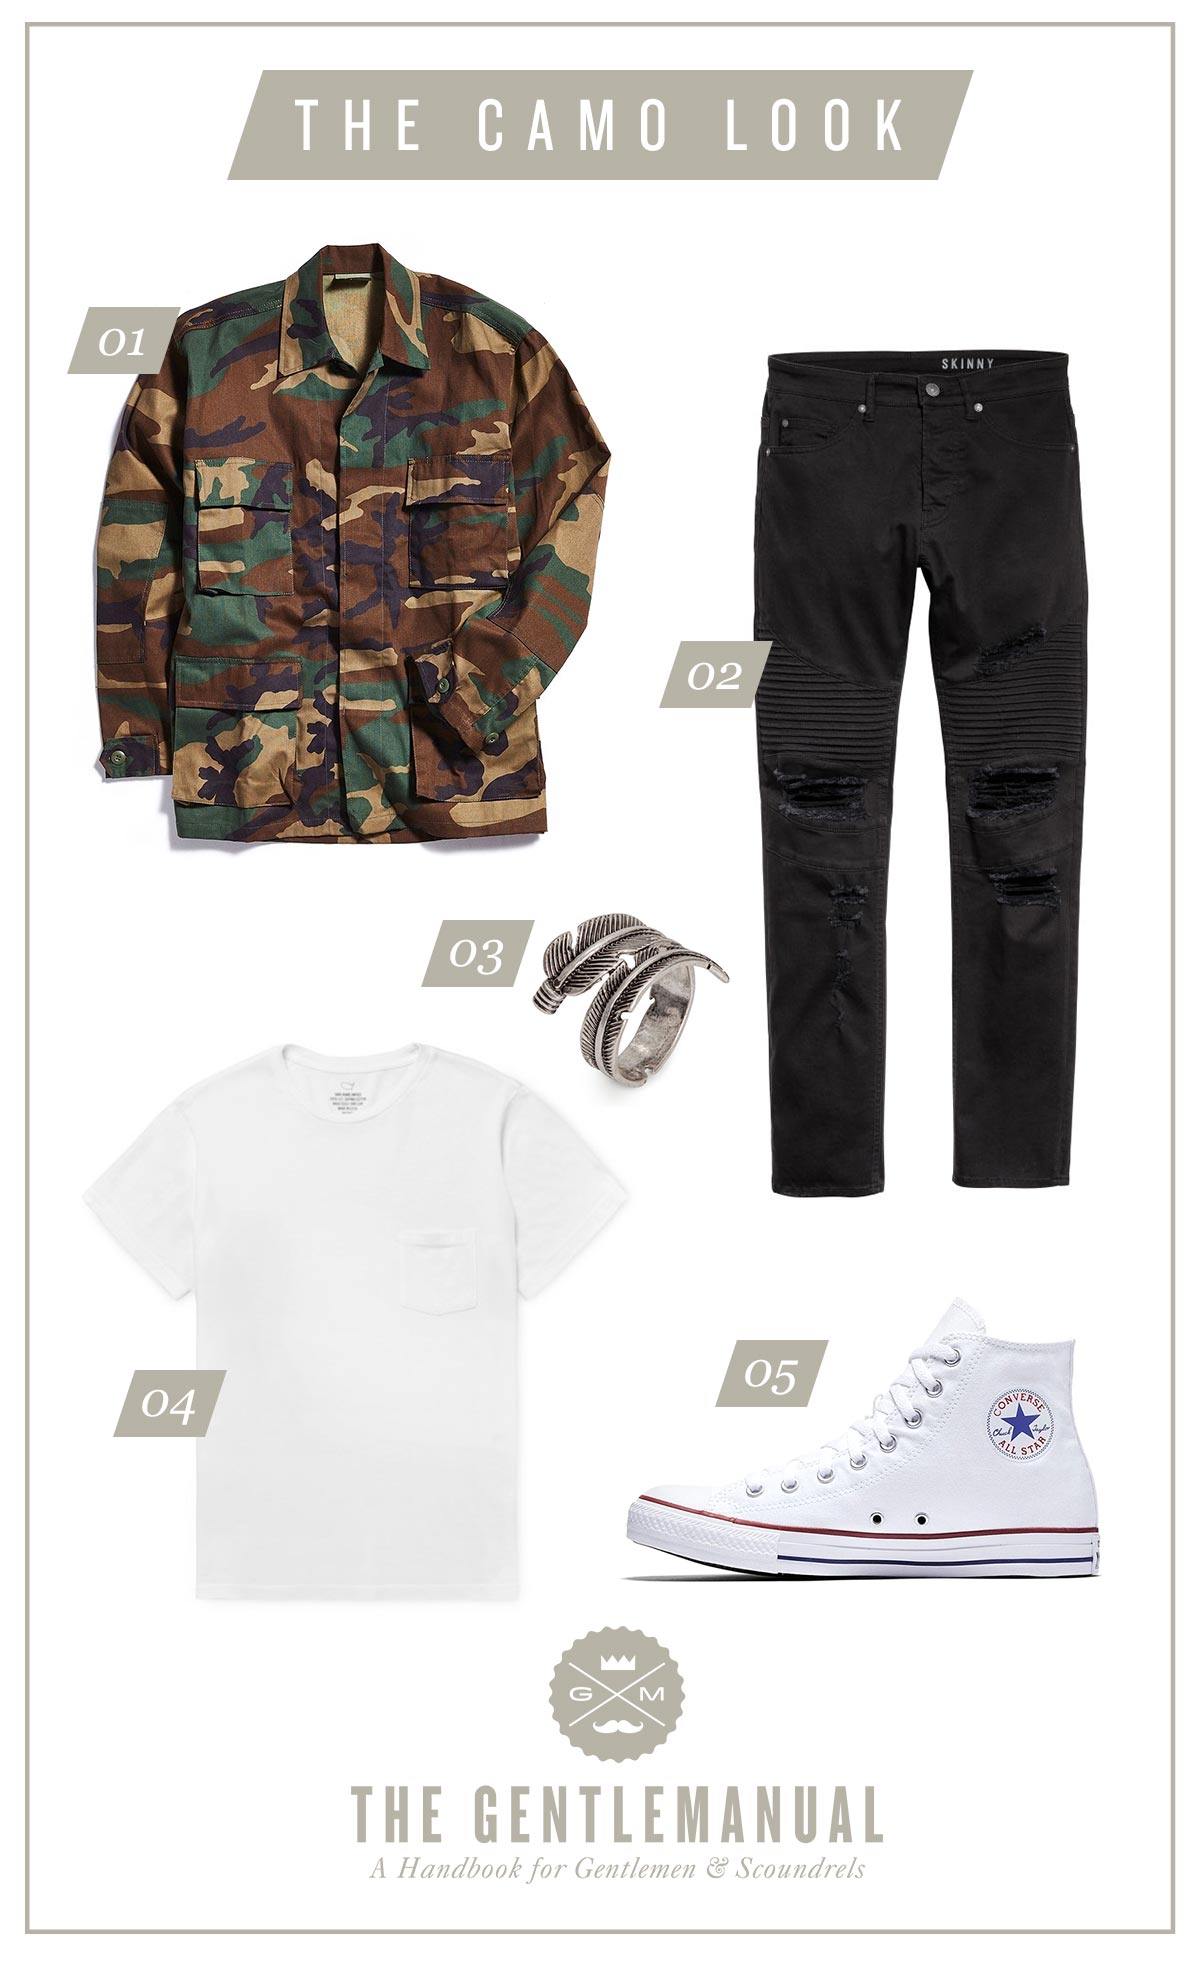 How to Style Your Camo Look